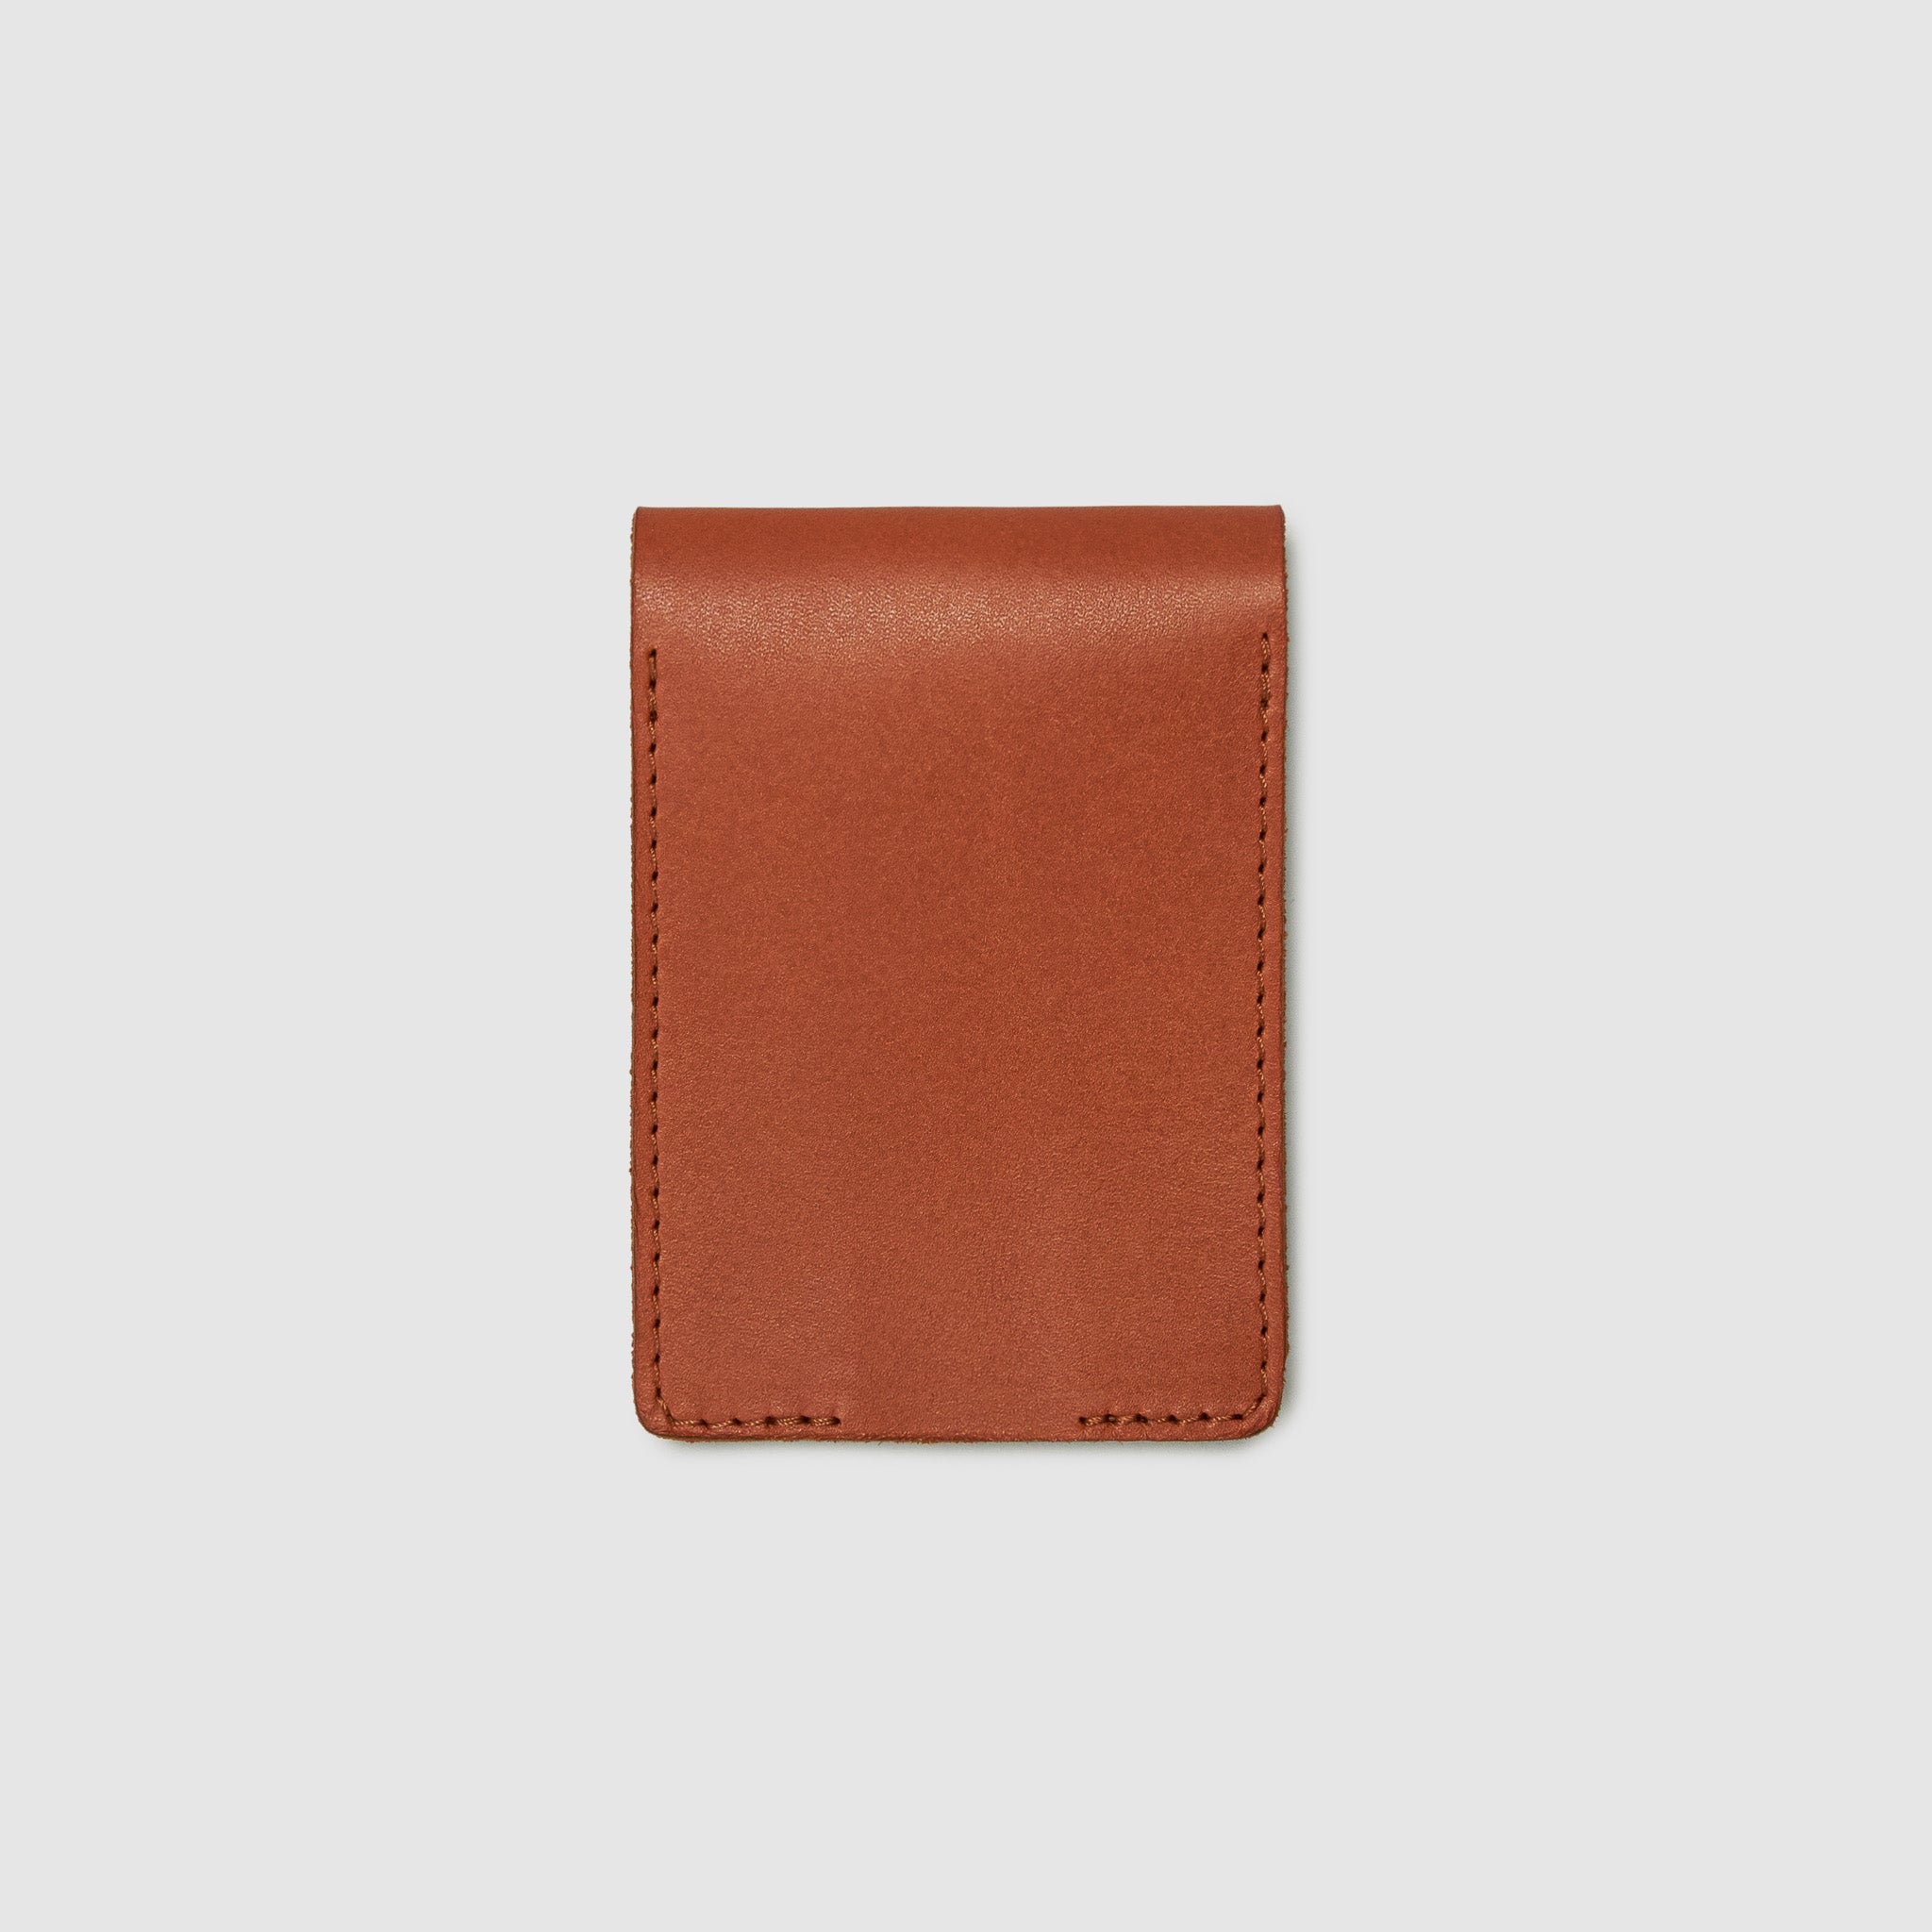 Anson Calder bifold or business card Wallet RFID french calfskin leather _cognac